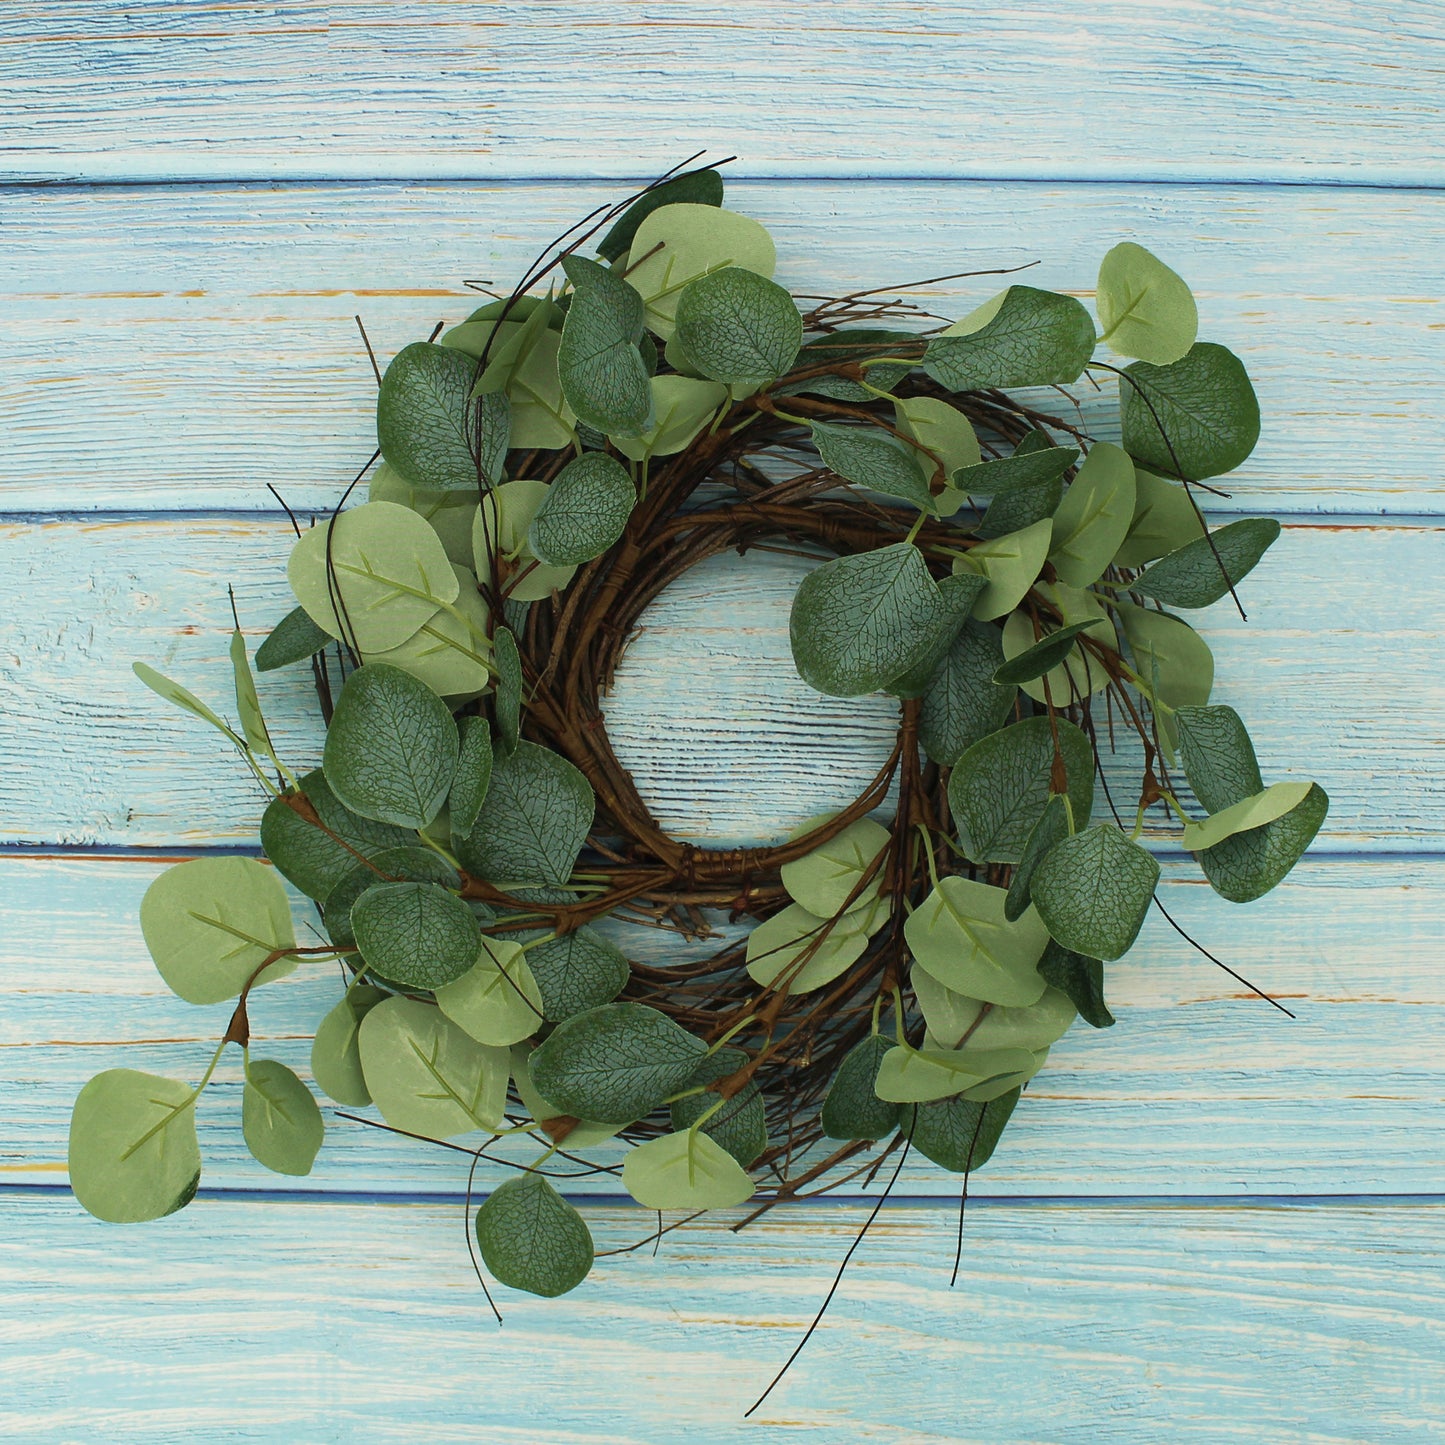 CVHOMEDECO. Rustic Country Artificial Eucalyptus Leaves and Twig Wreath, Year Round Full Green Wreath for Indoor or Outdoor Display, 12 Inch